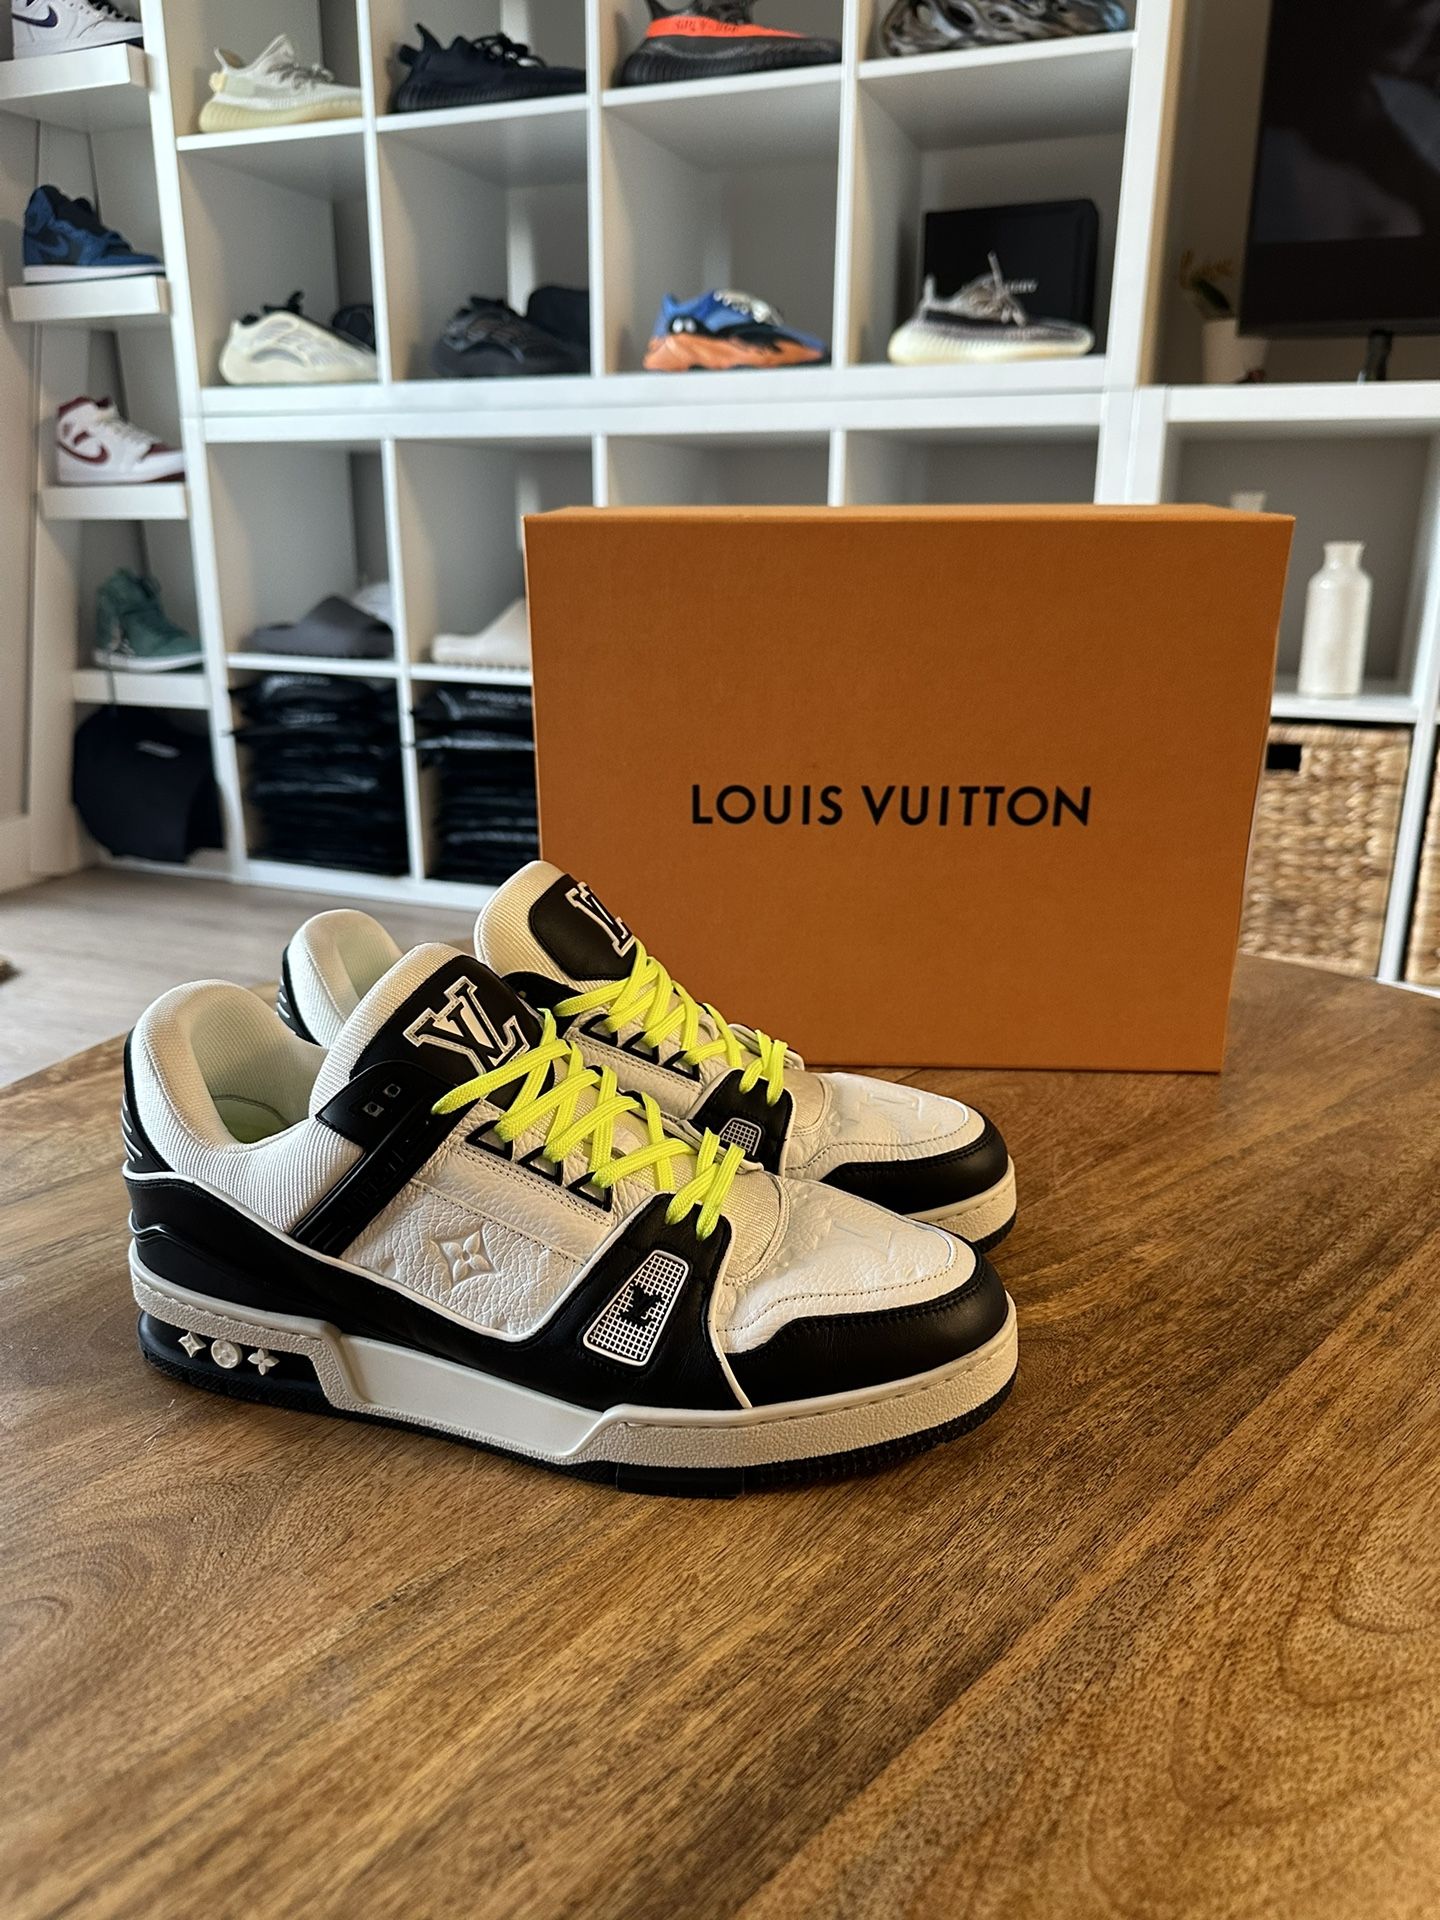 Louis Vuitton Lv Trainer Black & White Size 10 Pads for Sale in Aventura,  FL - OfferUp